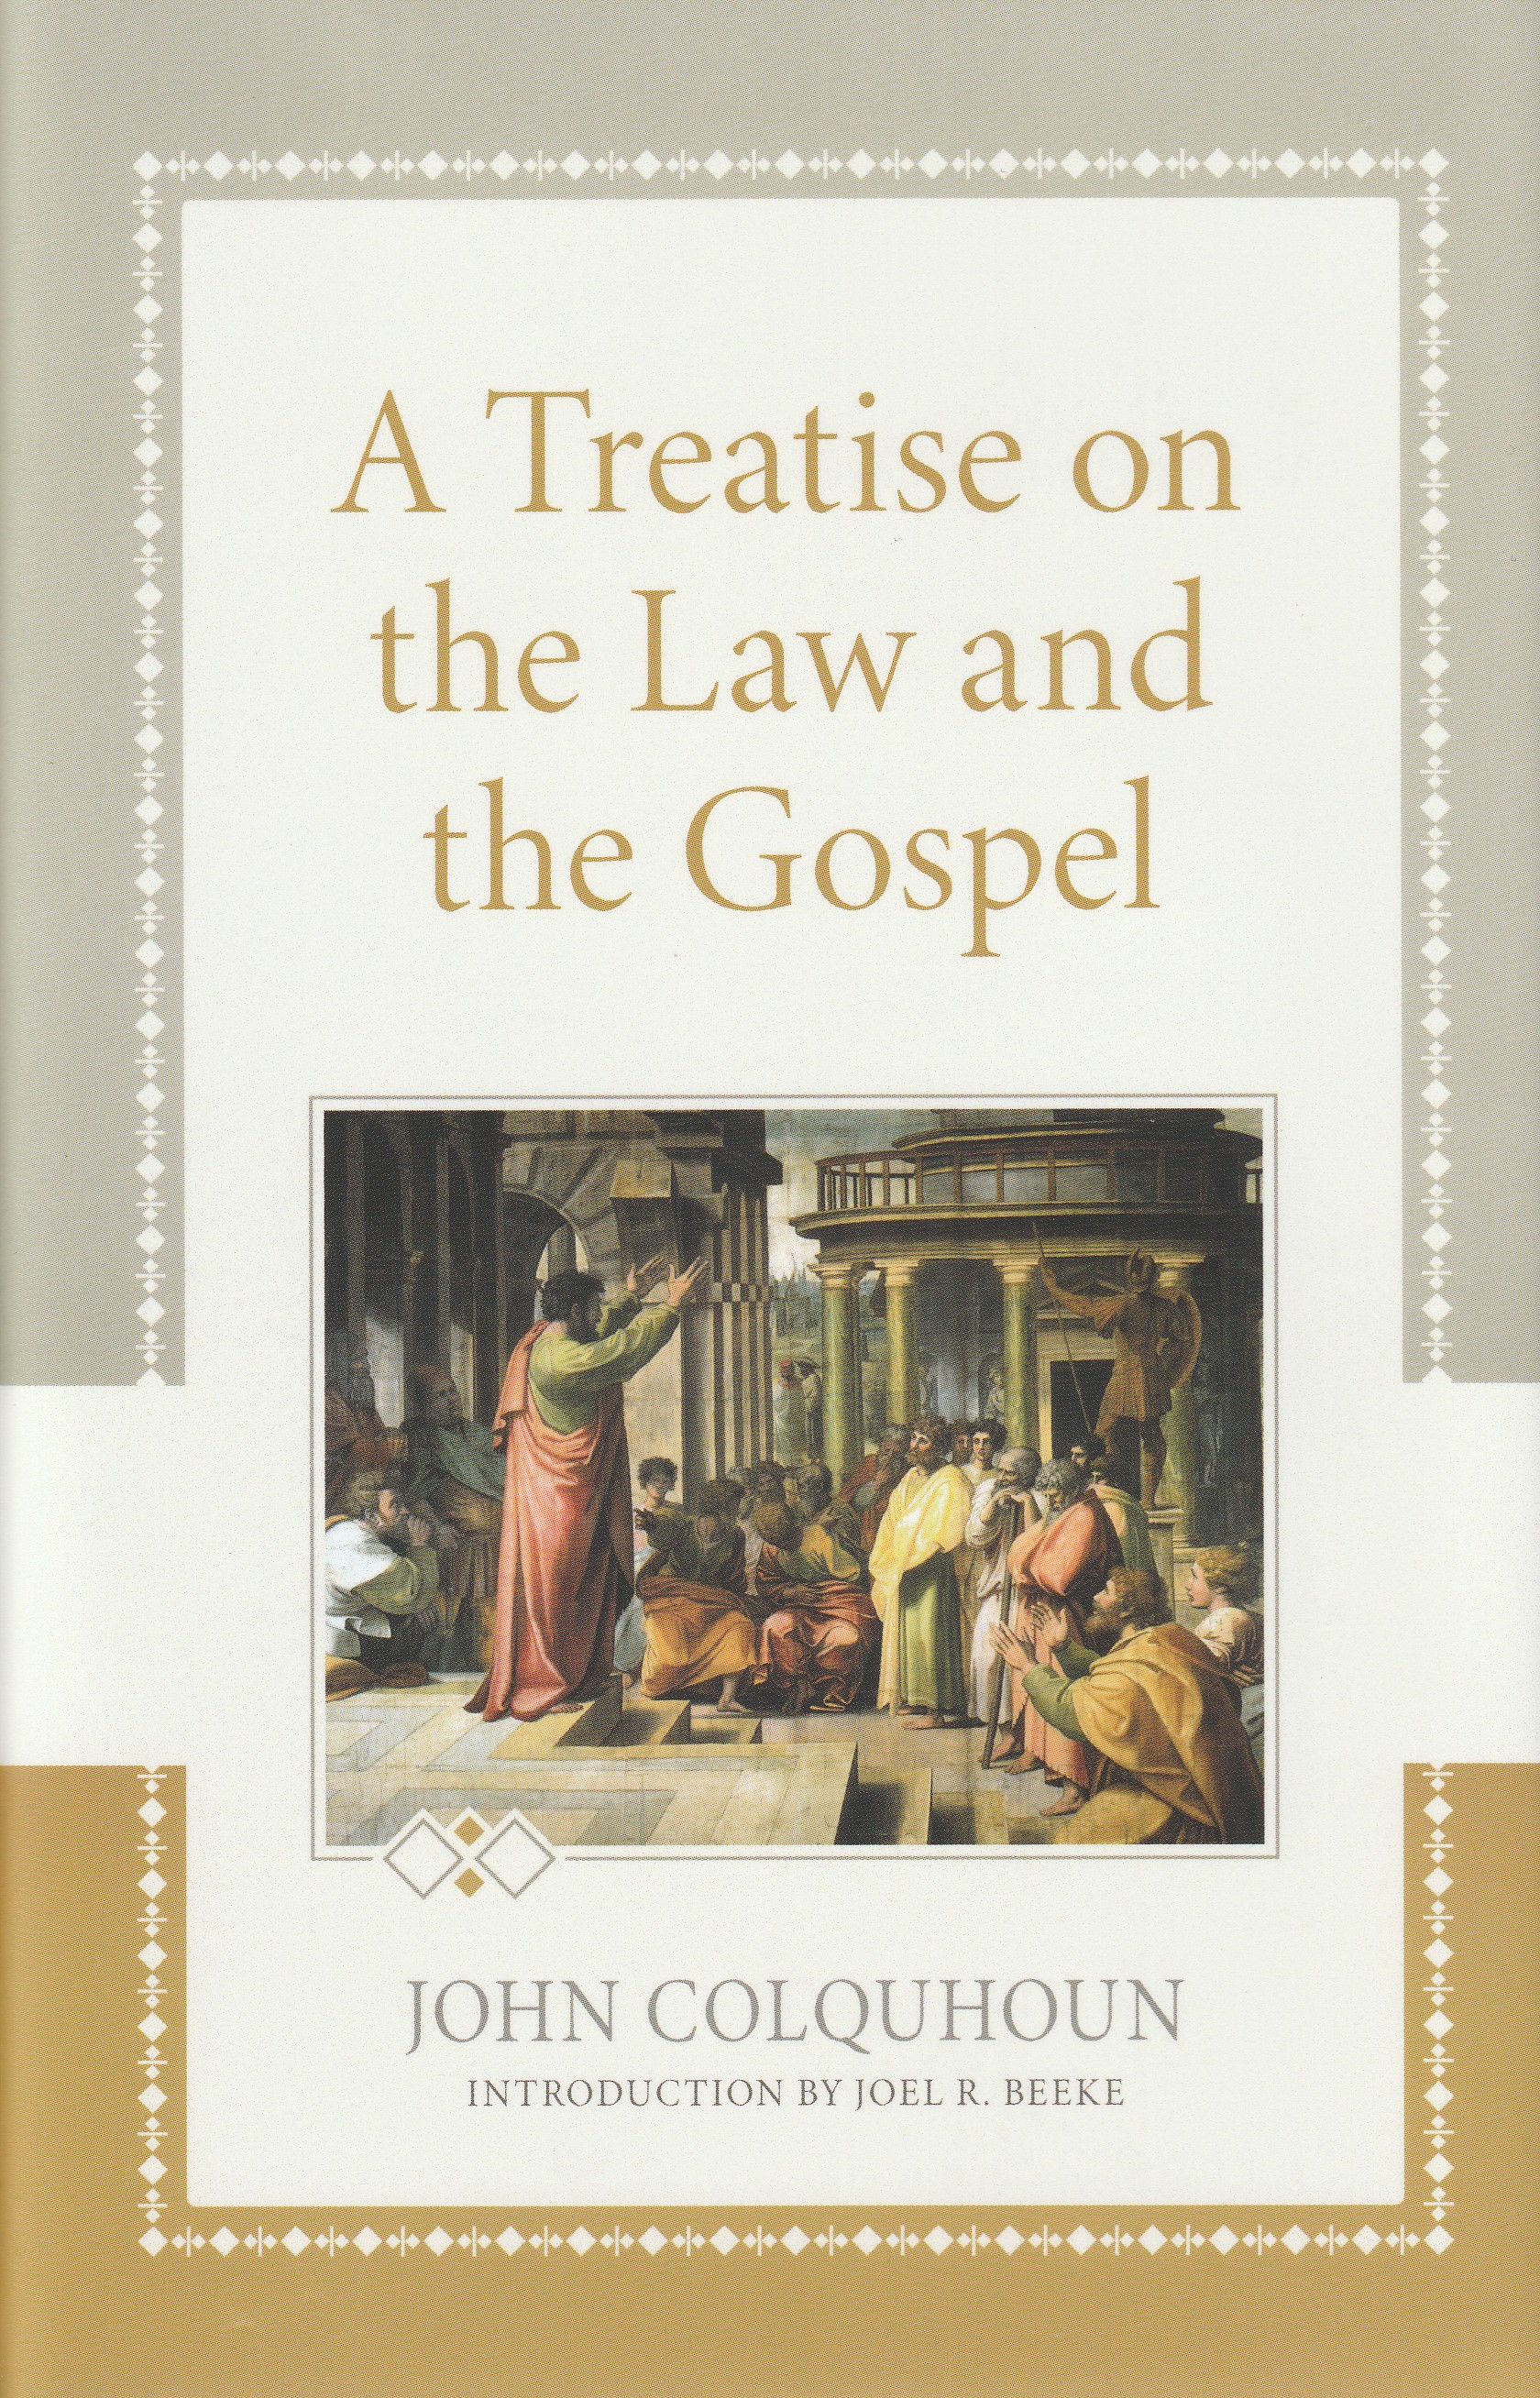 Treatise on the Law and Gospel